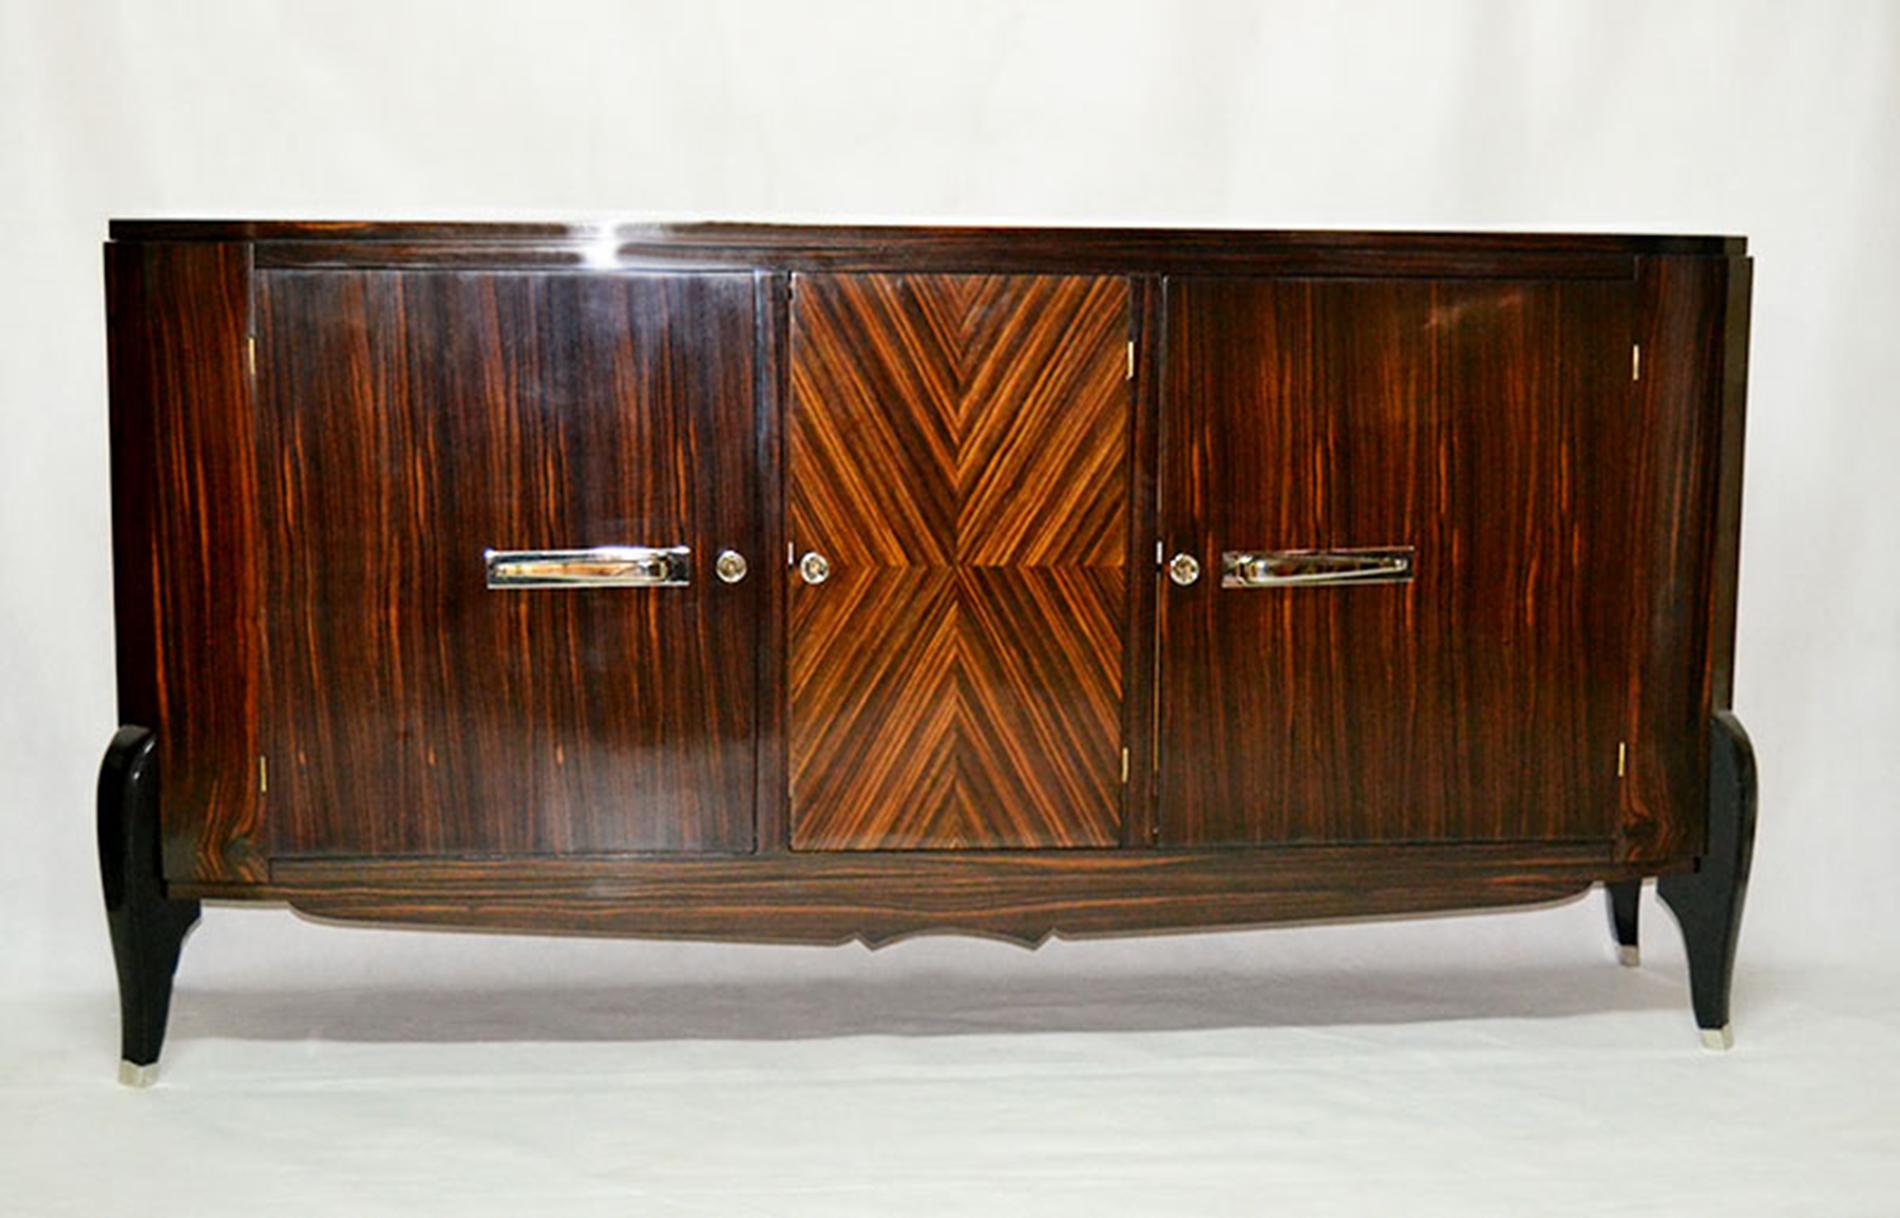 Large buffet in Macassar ebony from the classicist line of Jean Pascaud's taste with nickel-plated metal handles and sabots,
circa 1940
Good vintage condition
Documentation: attached 